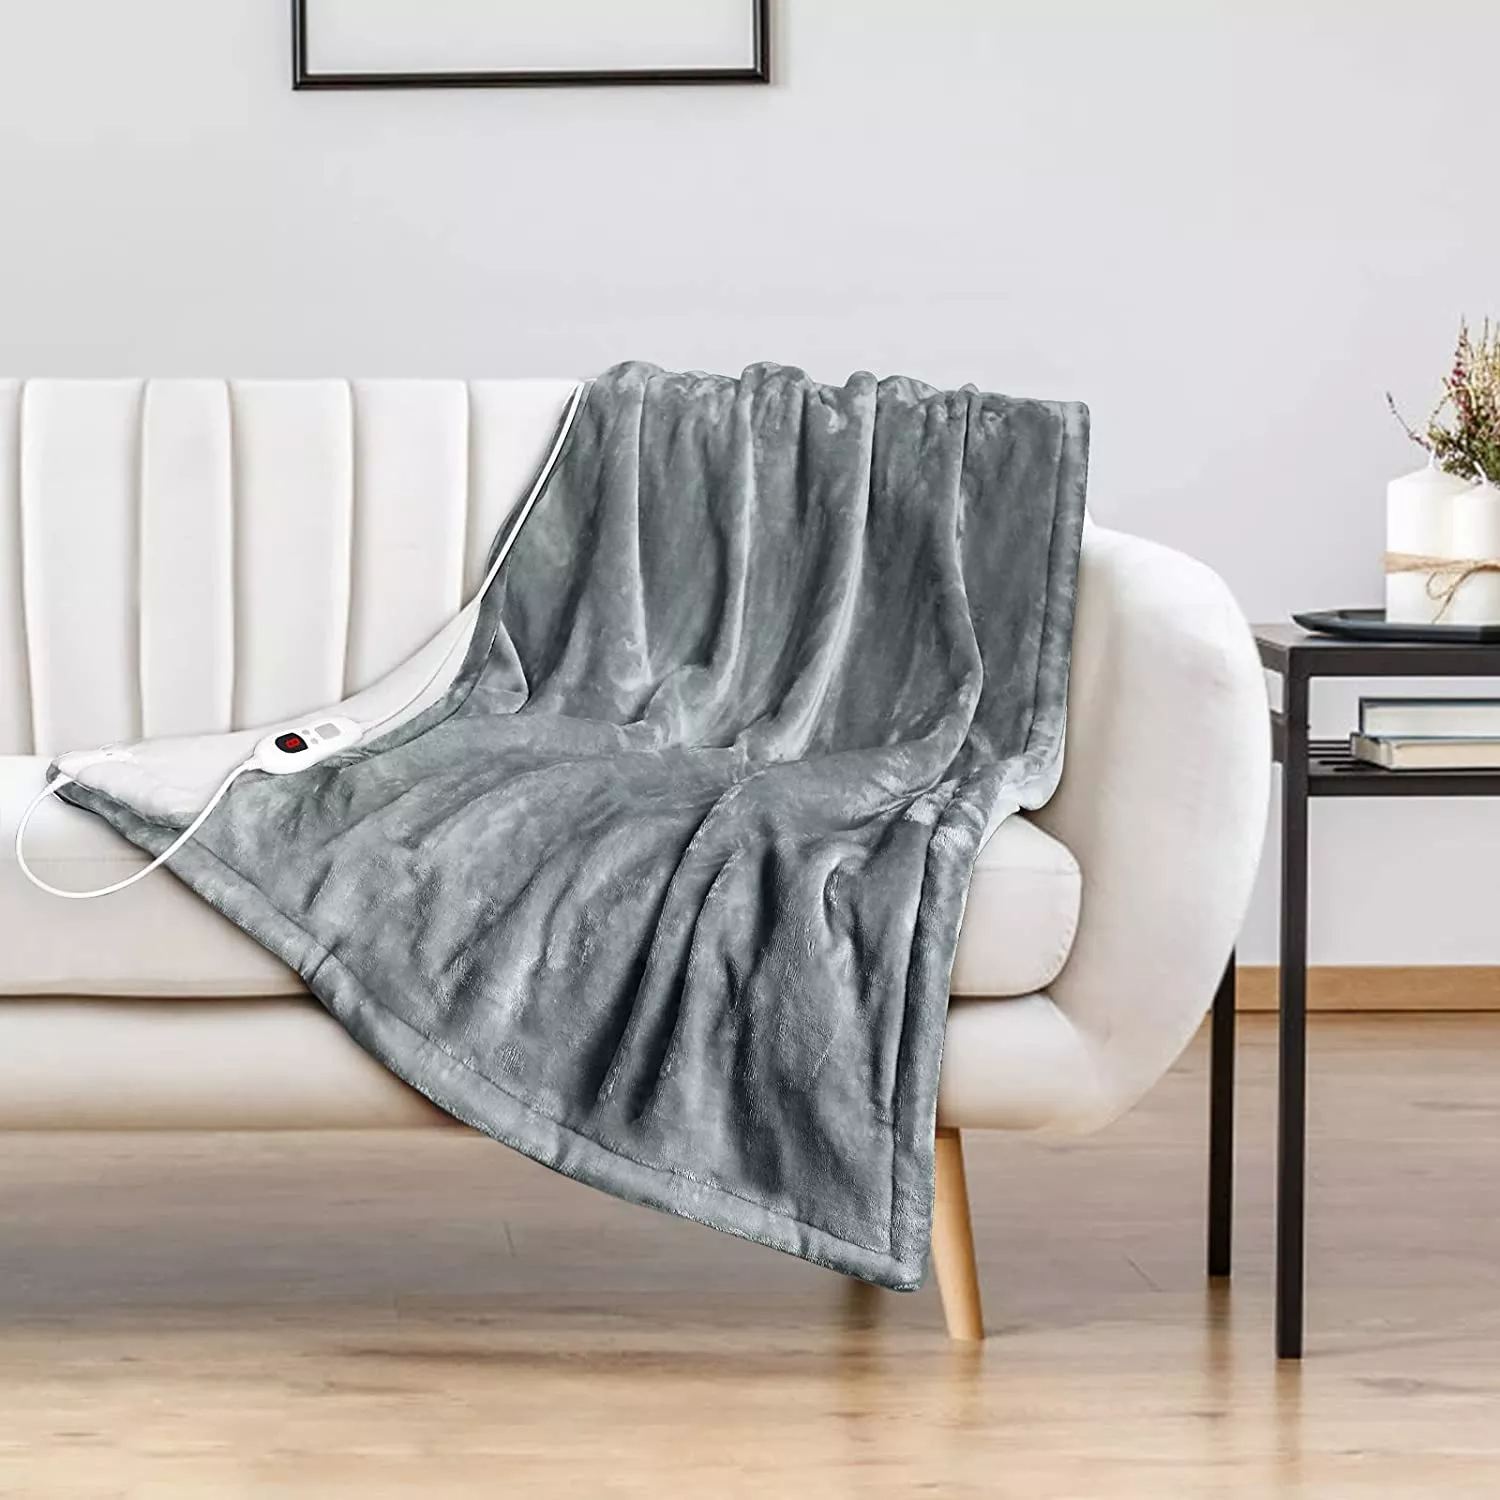 Zeus Energies Thick Throw Electric Blanket, Washable and Quick Drying, 152*127 CM